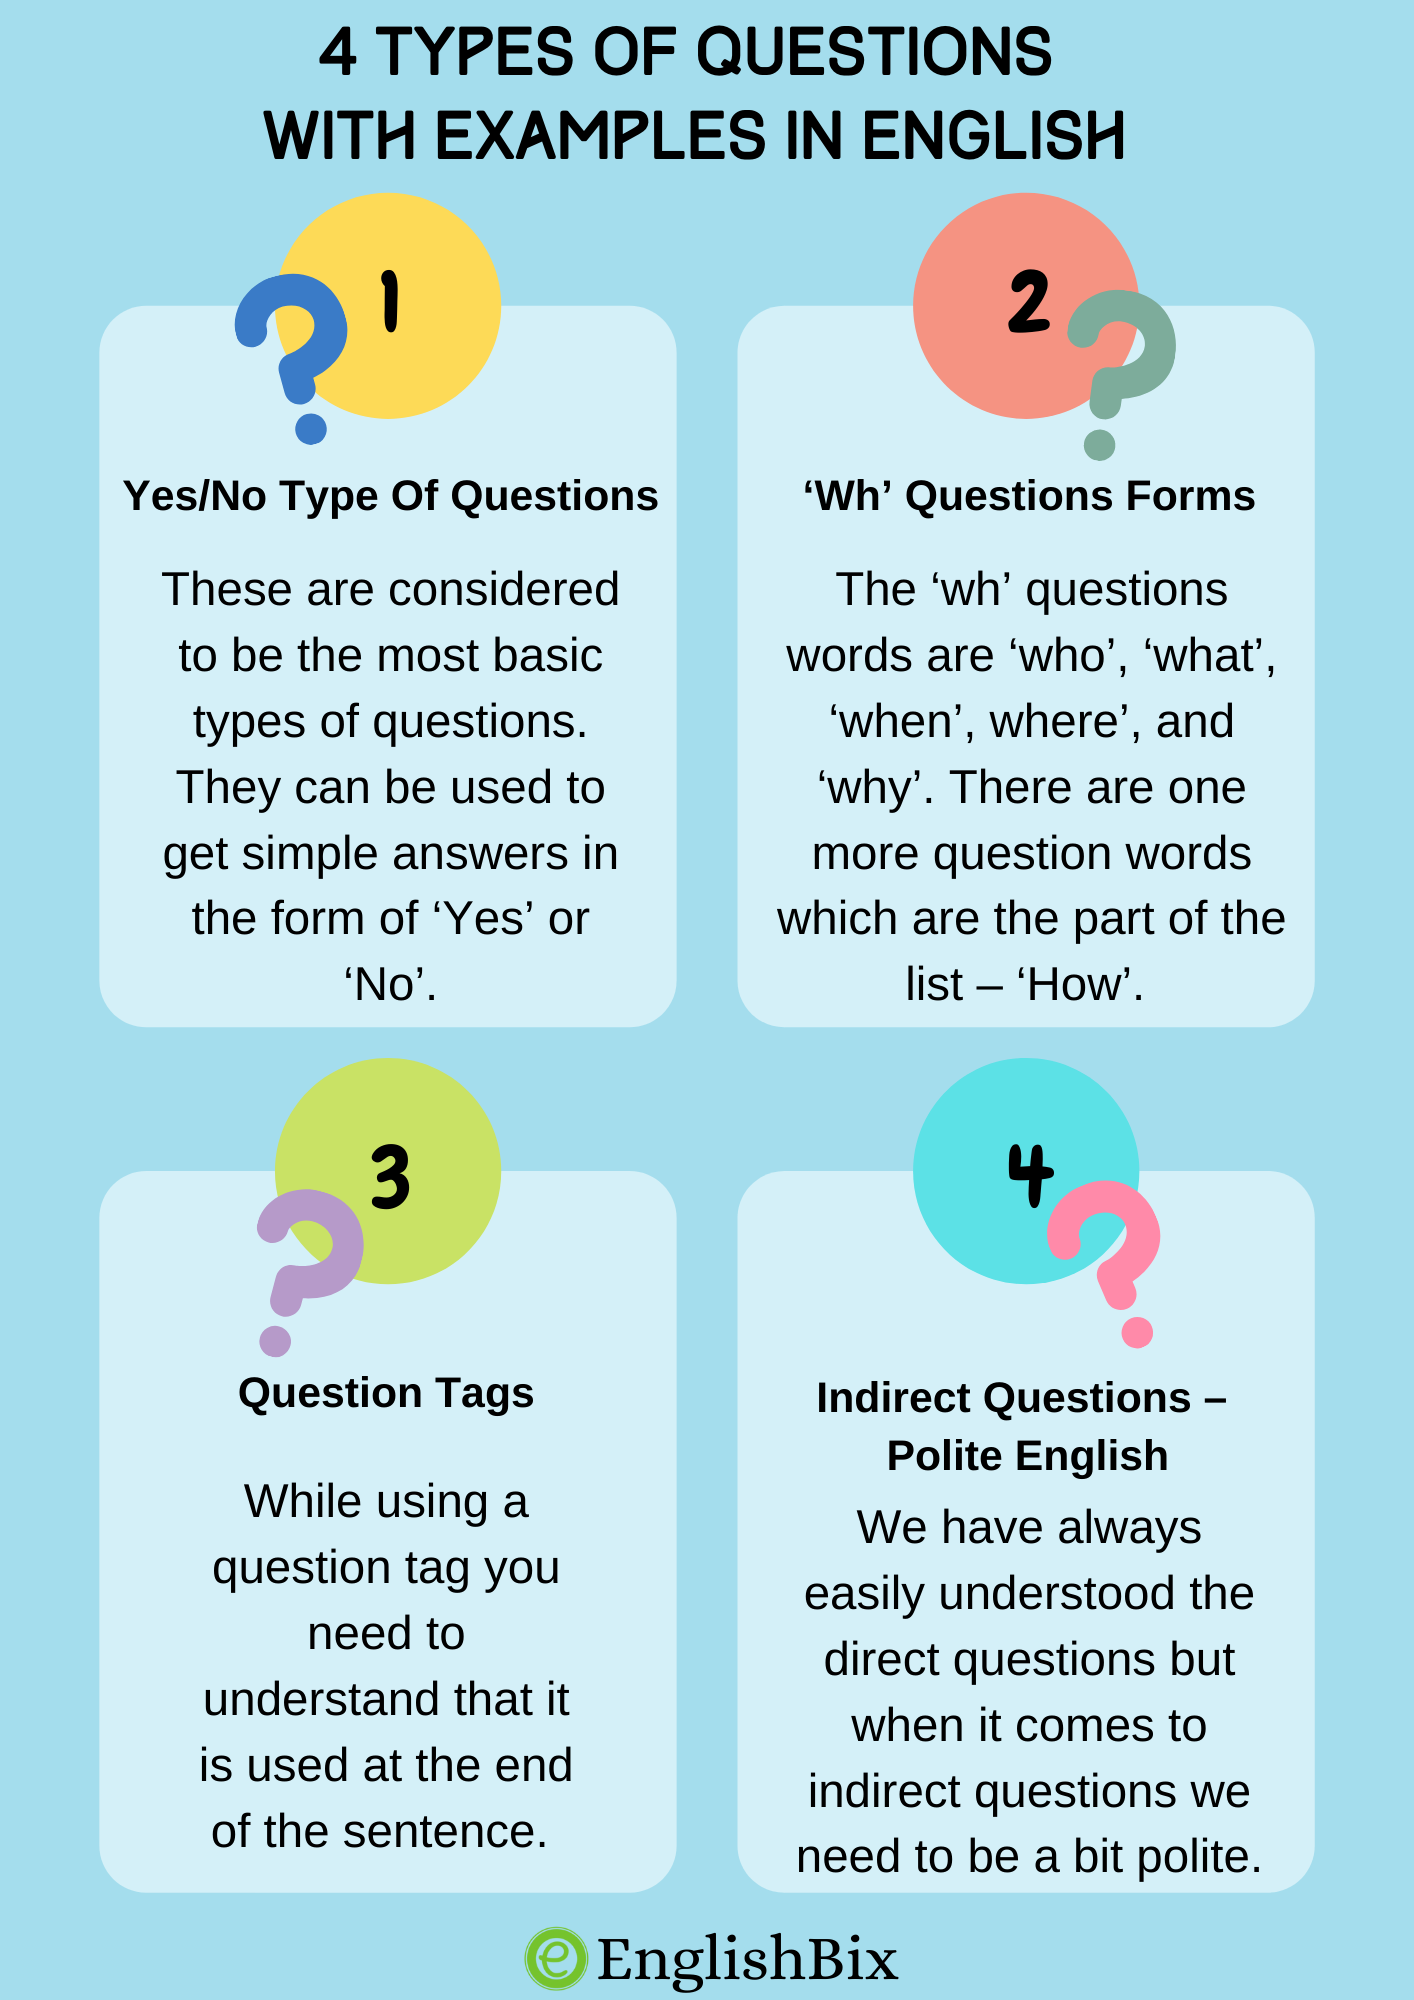 5-framing-of-questions-in-english-grammar-webframes